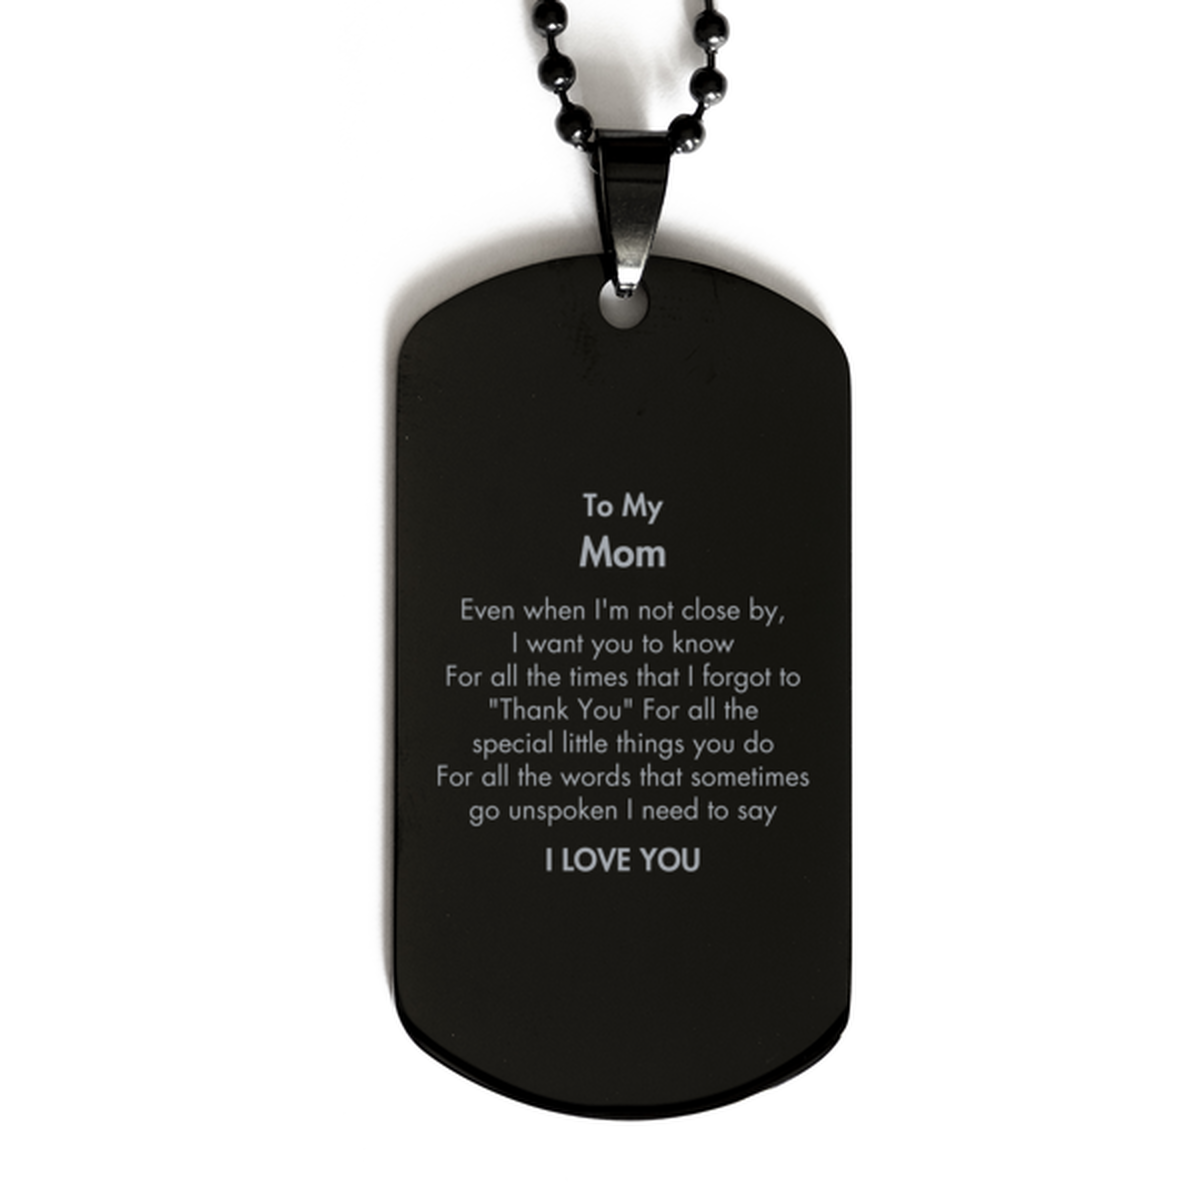 Thank You Gifts for Mom, Keepsake Black Dog Tag Gifts for Mom Birthday Mother's day Father's Day Mom For all the words That sometimes go unspoken I need to say I LOVE YOU